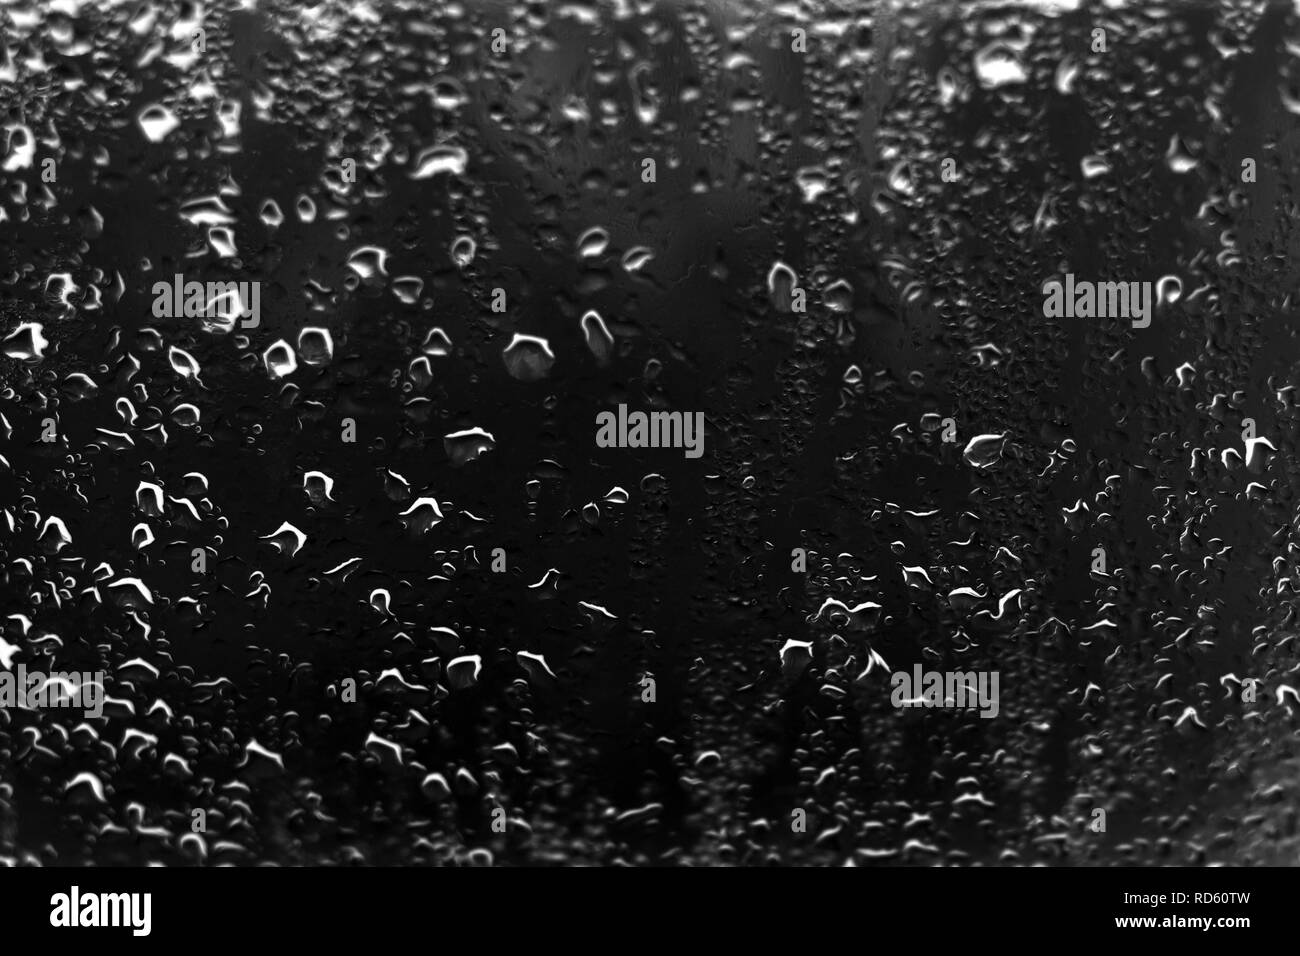 Condensation on glass Black and White Stock Photos & Images - Alamy